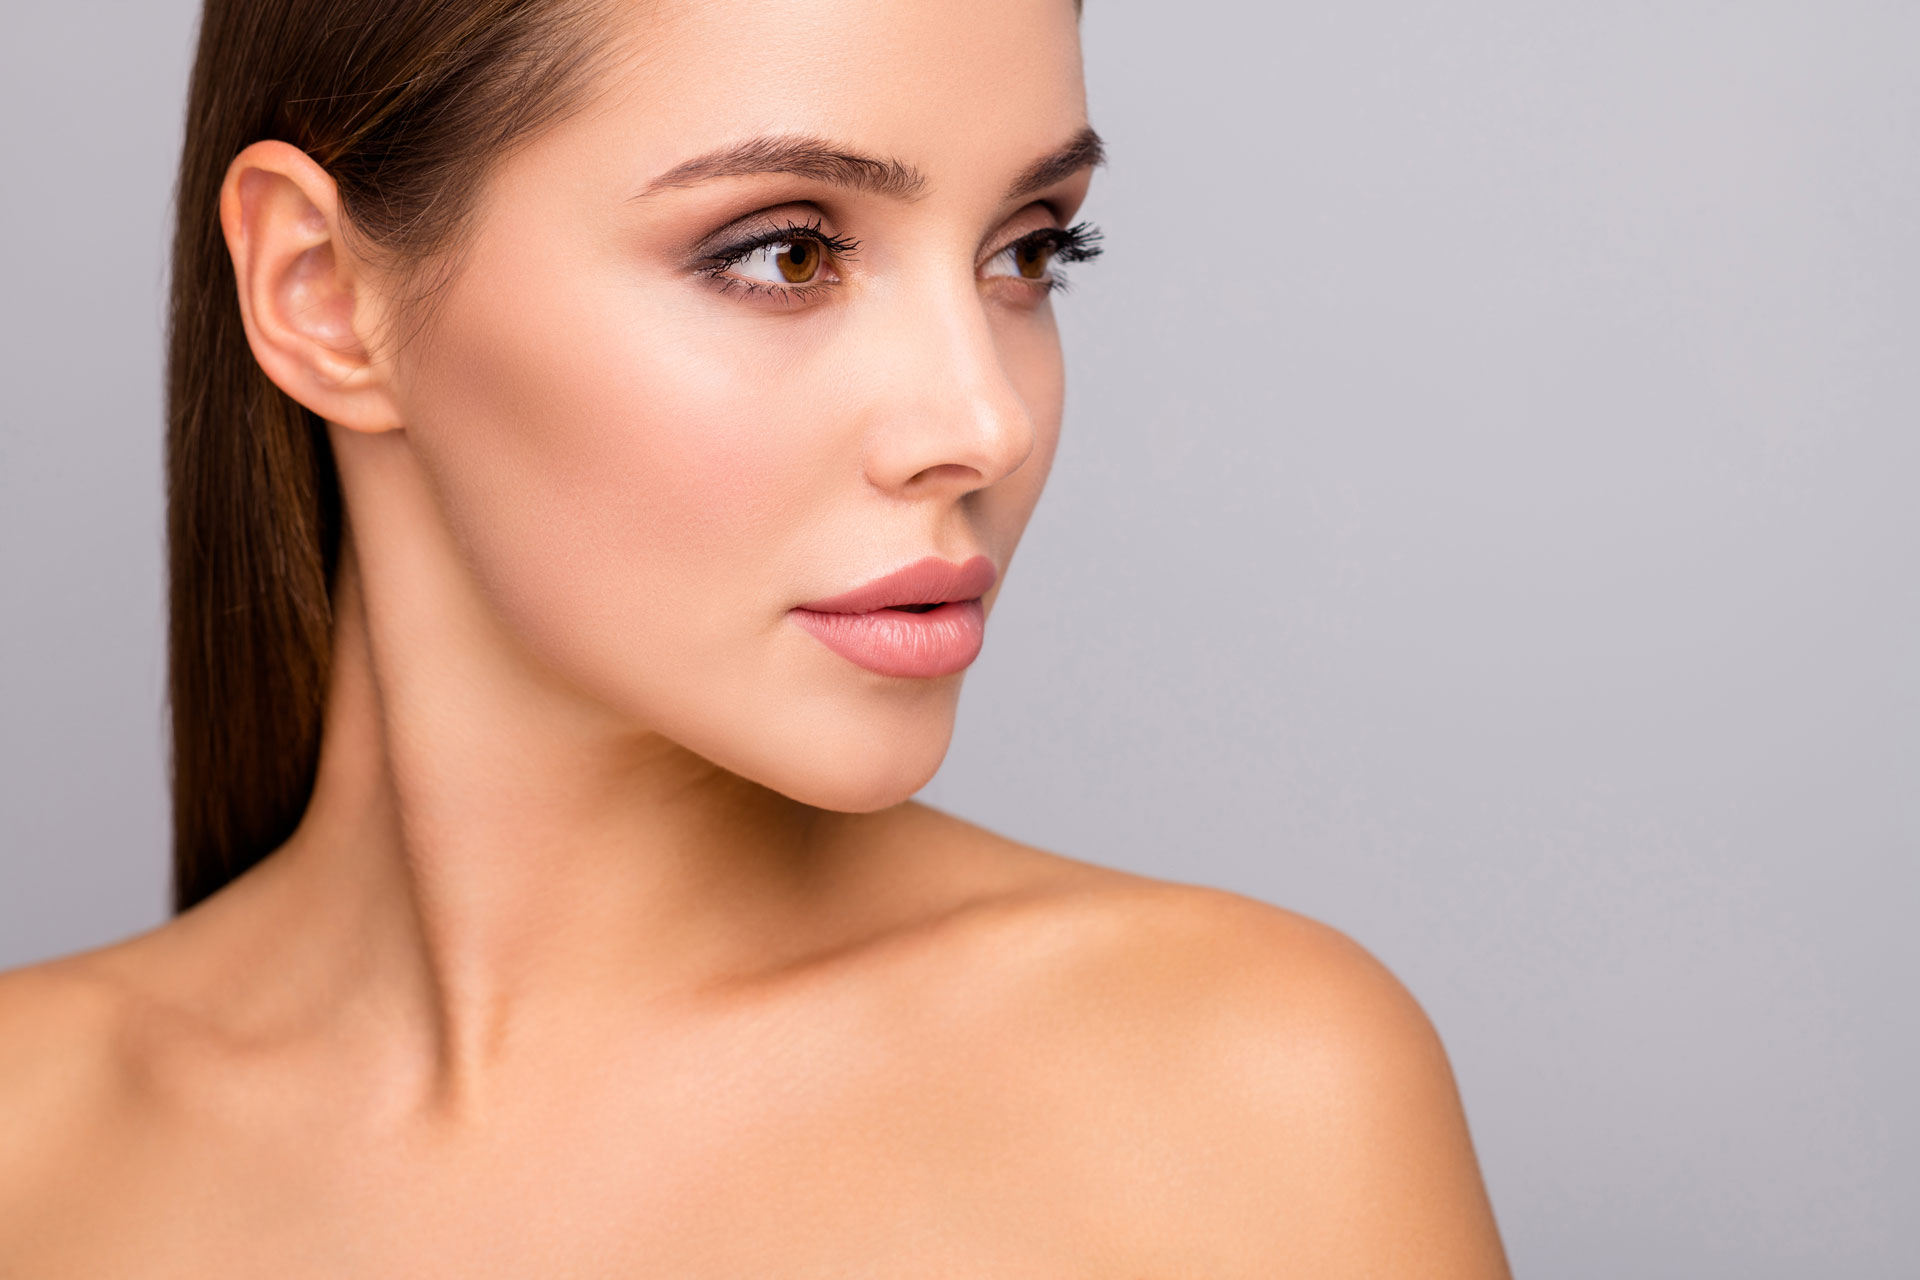 Jawline Augmentation and Its Impact On Overall Facial Aesthetics